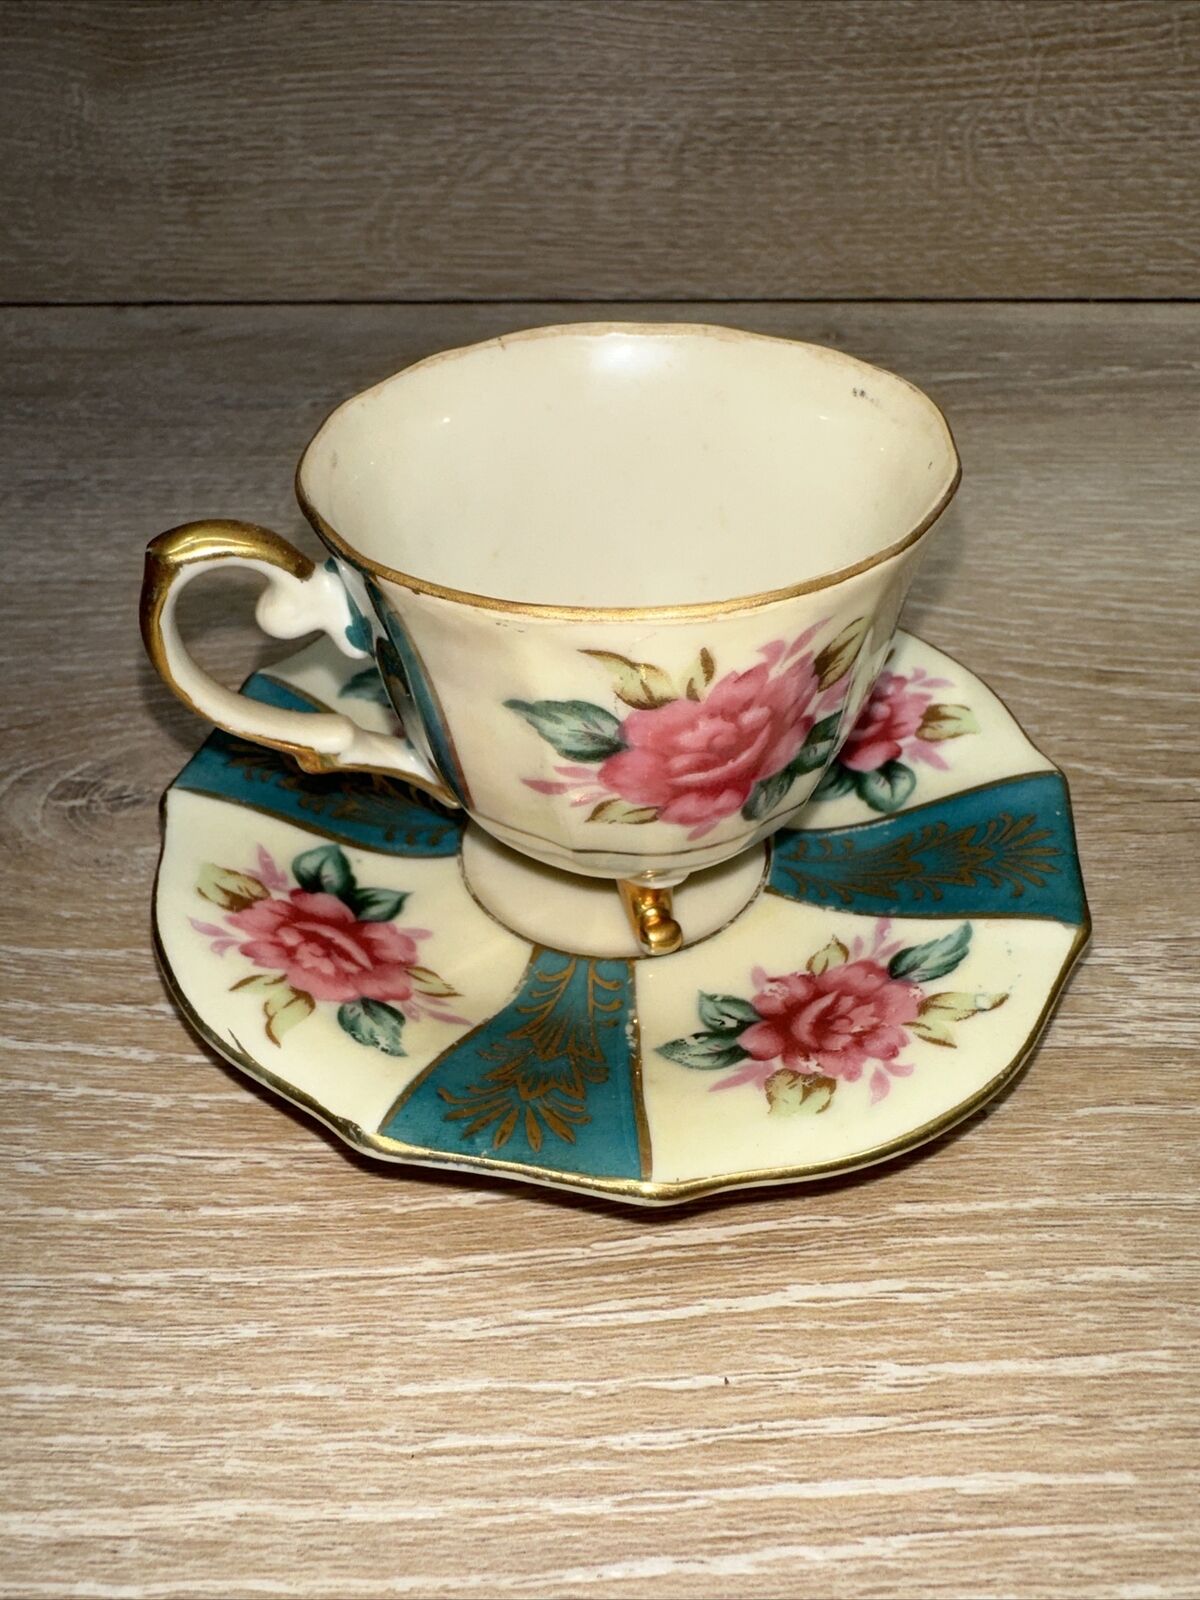 Vintage Shafford Japan Hand Painted Pink & Gold  Teacup and Saucer